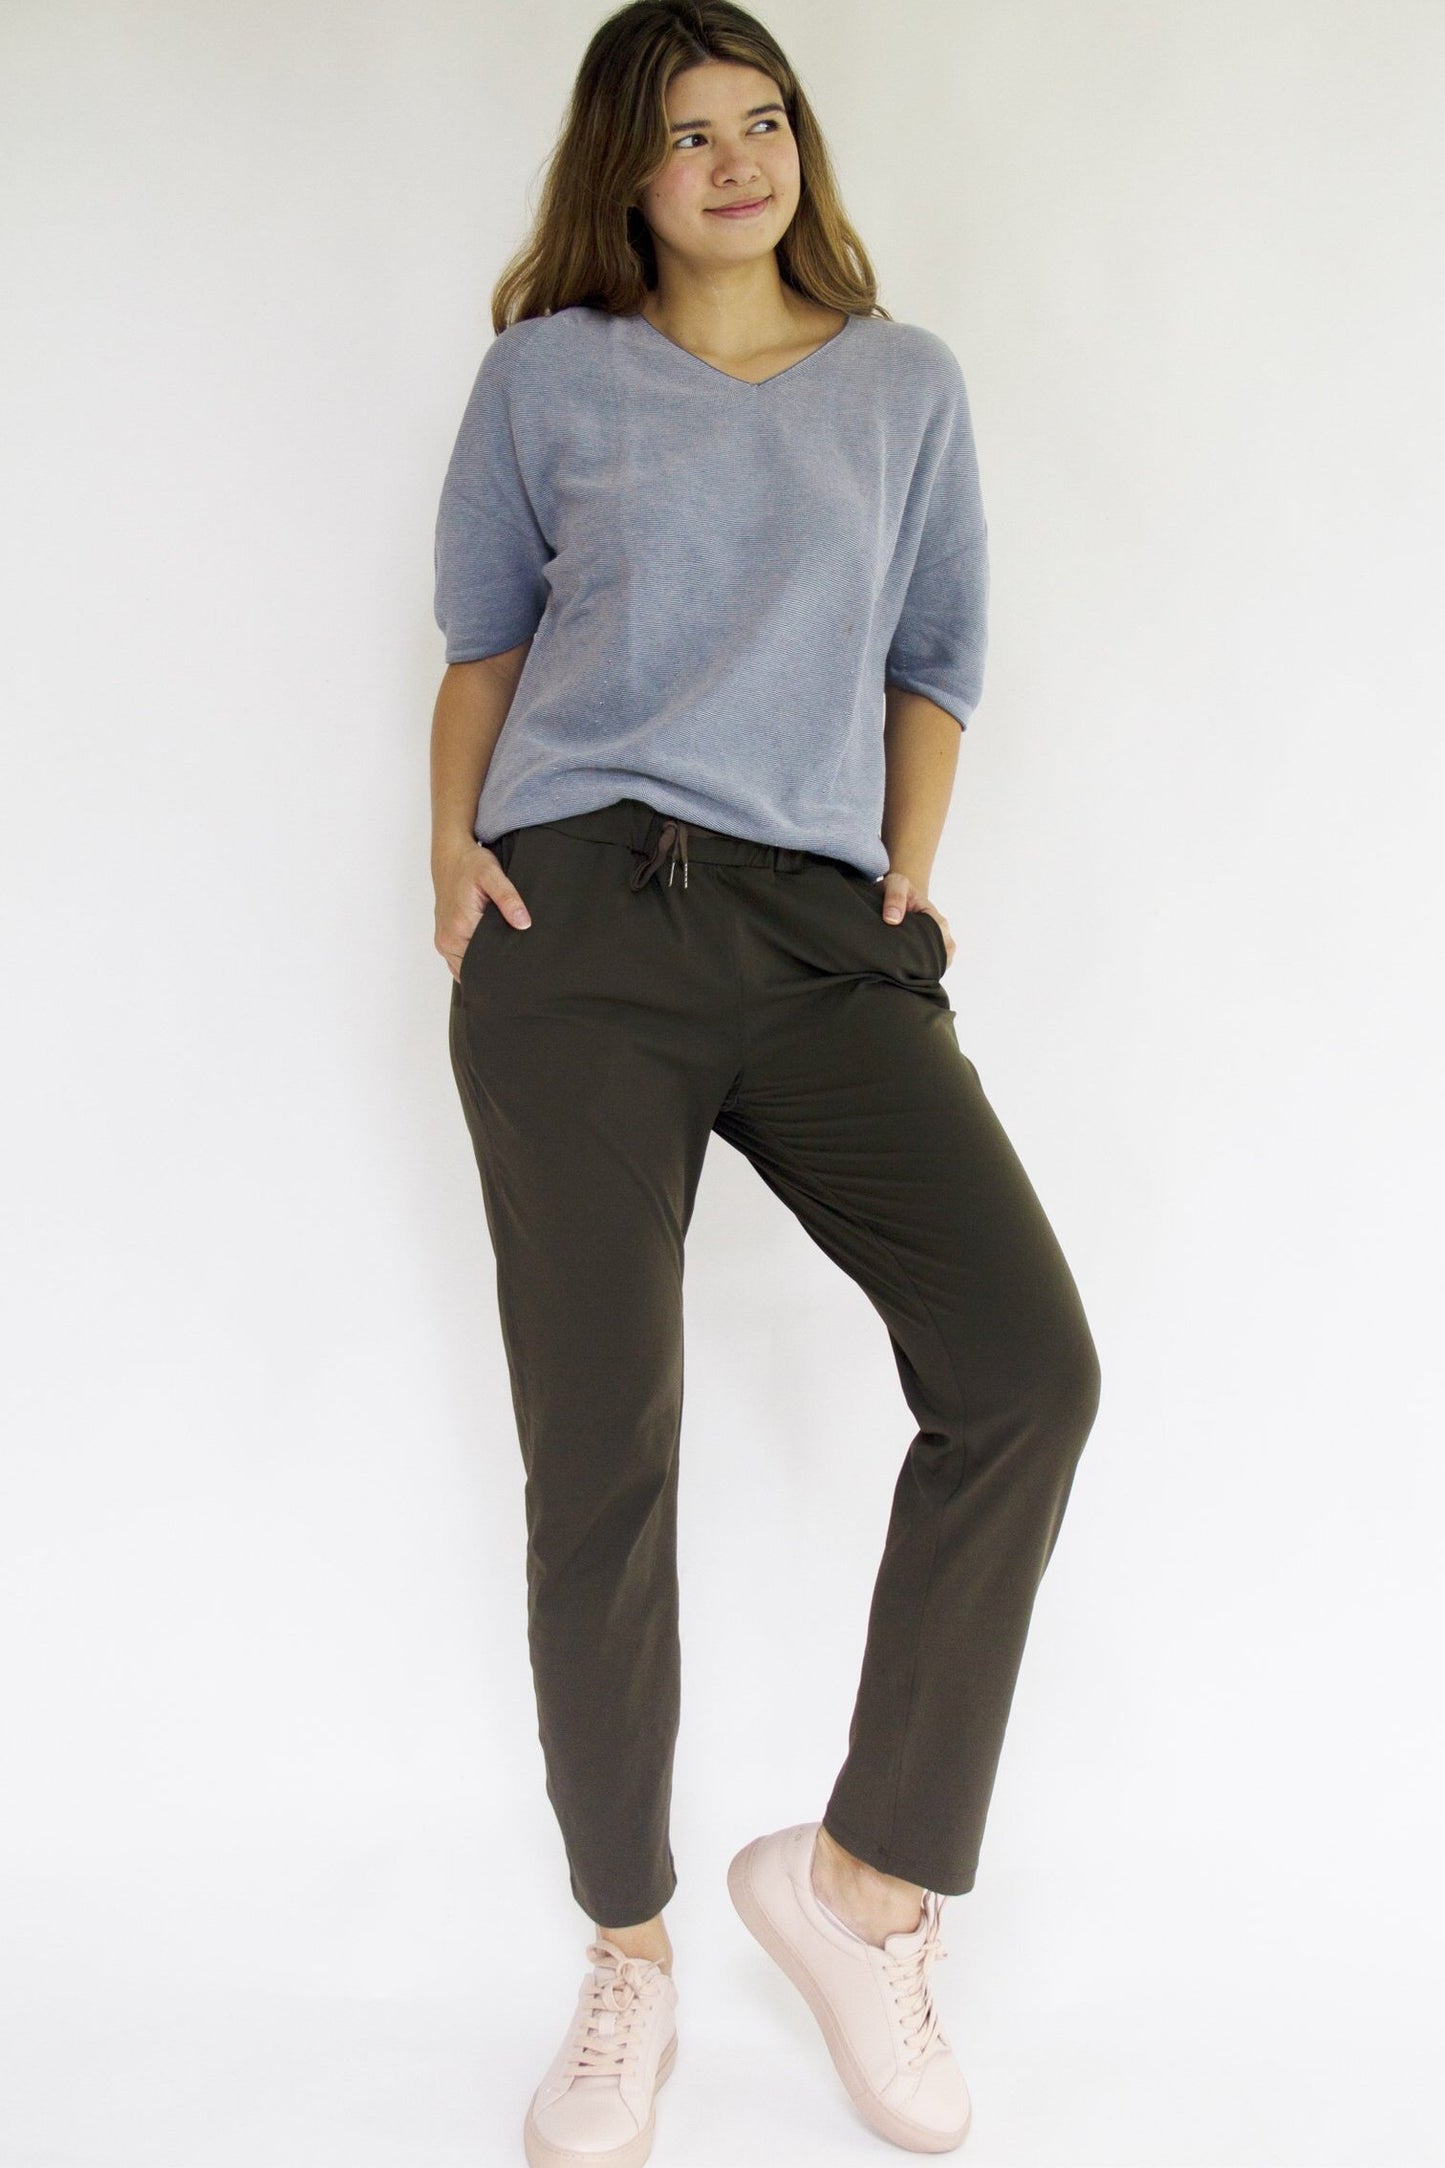 CRUISER PANTS 25” IN OLIVE